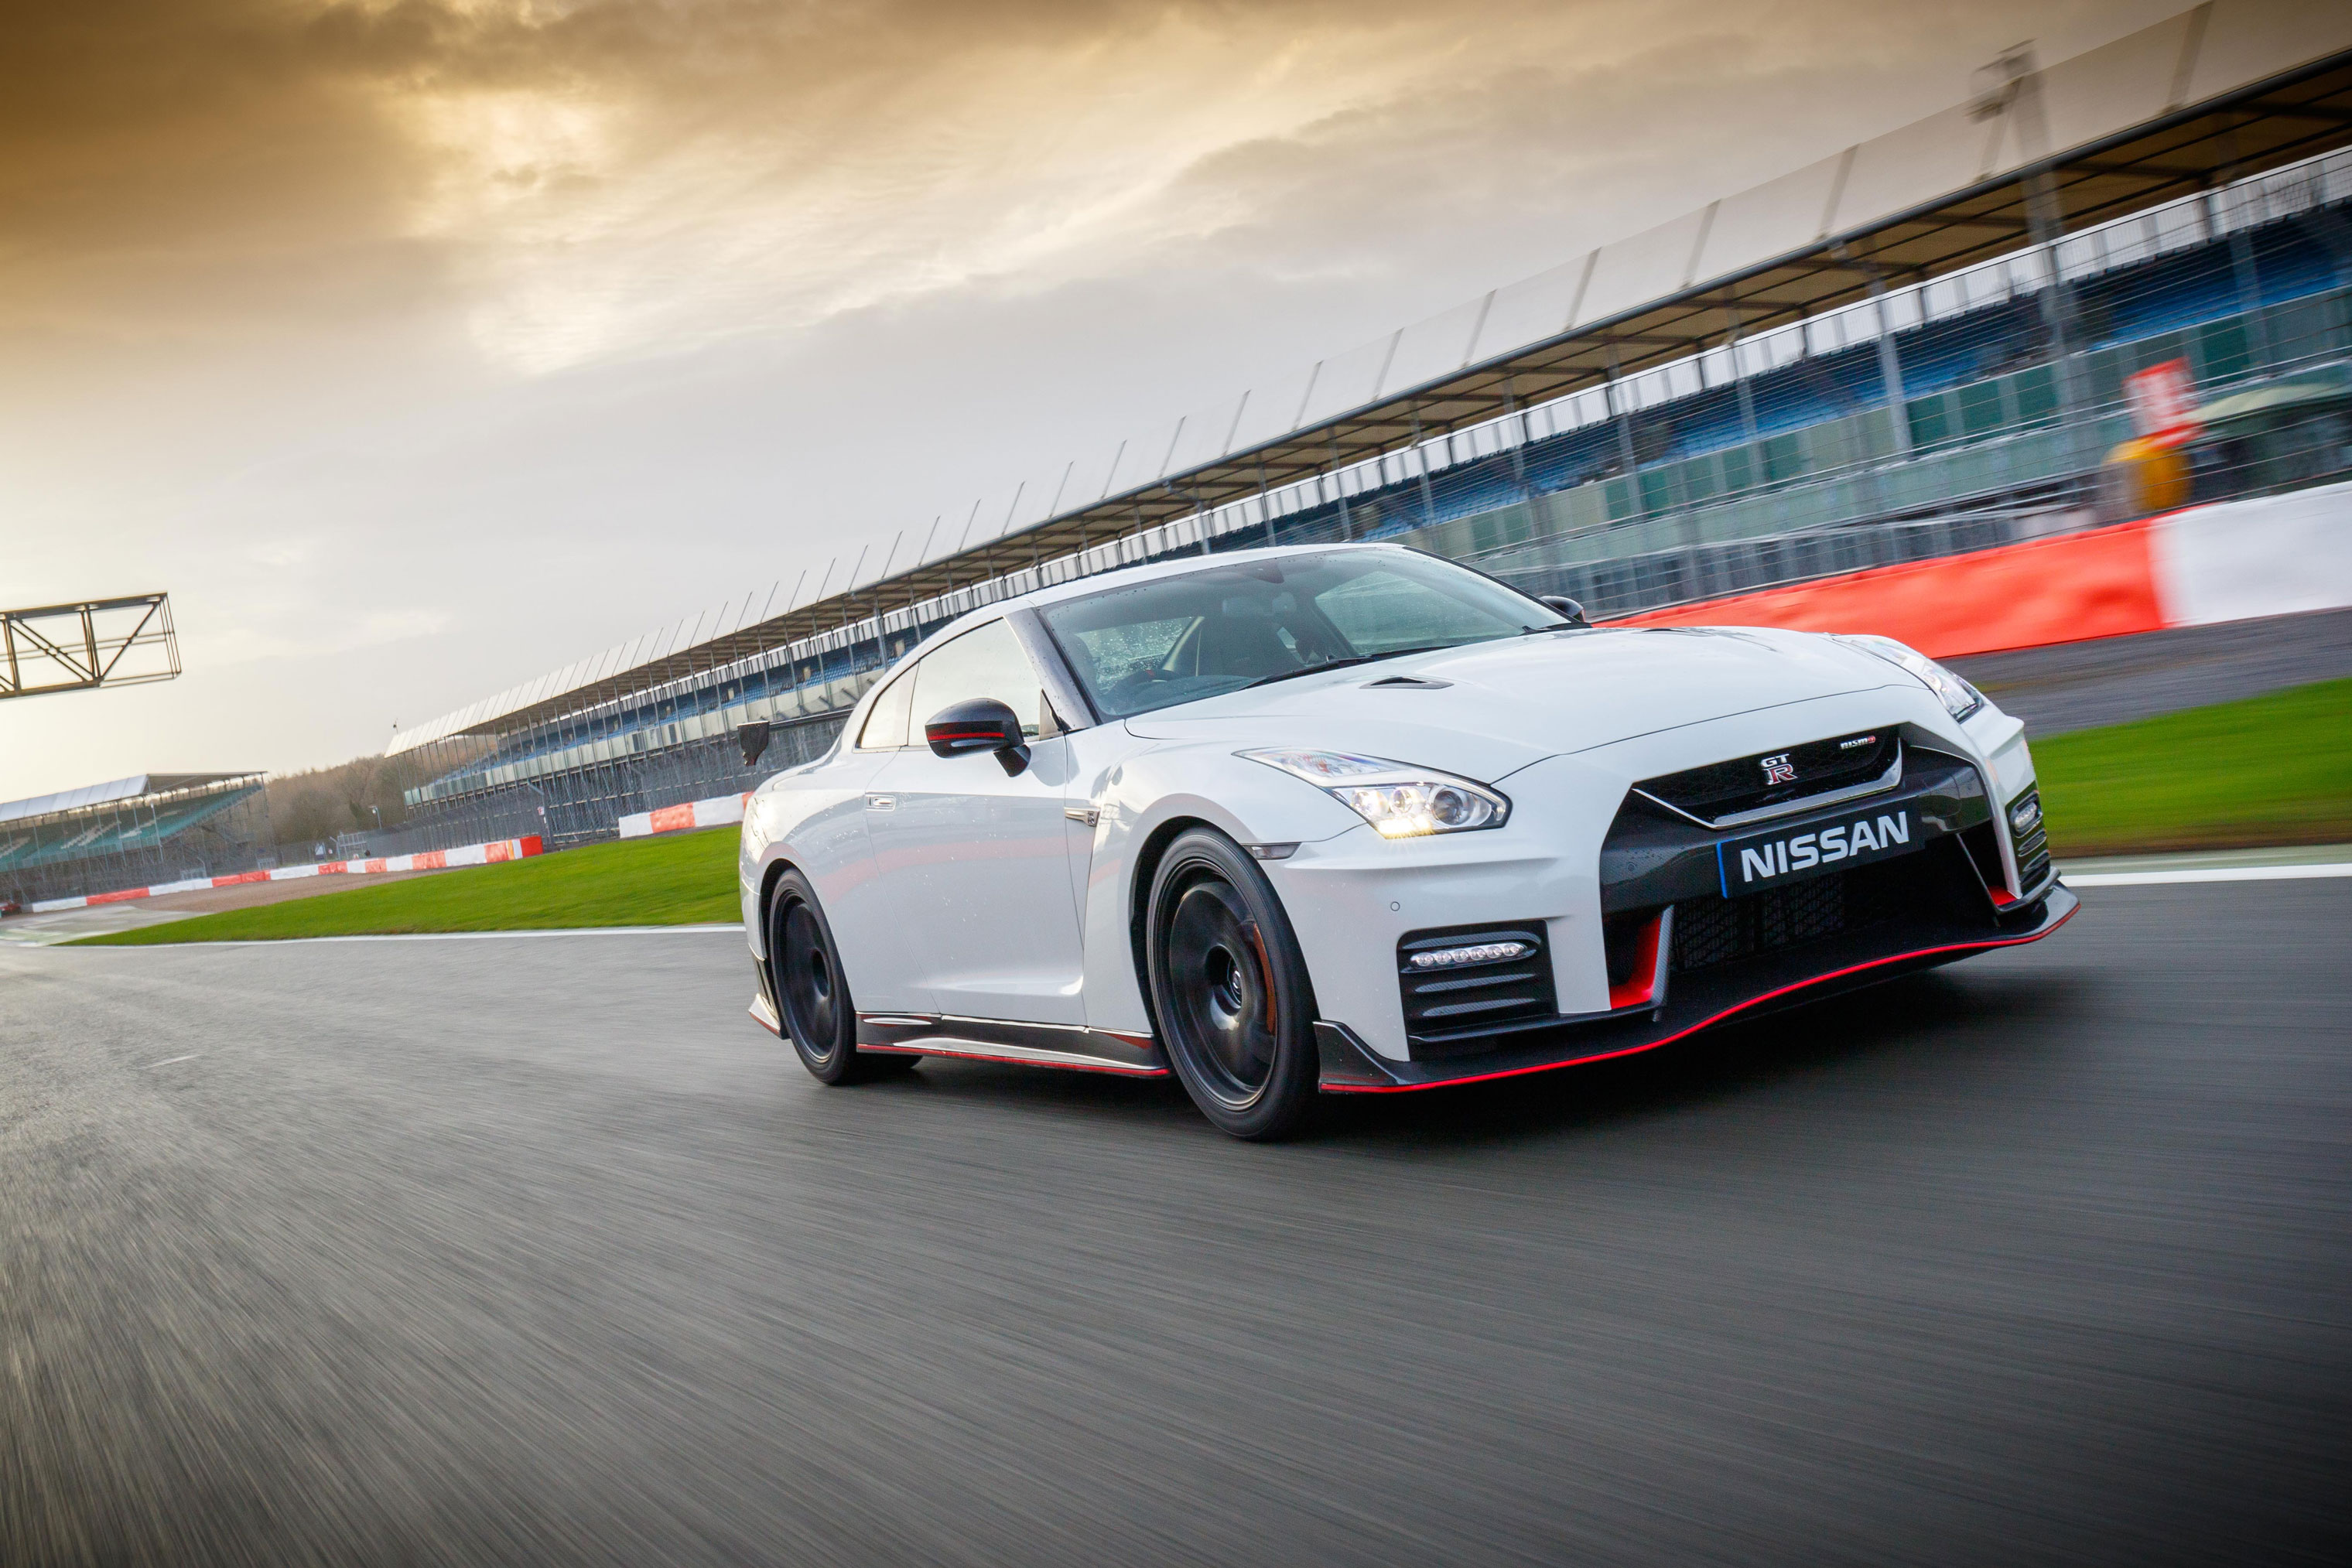 17 Nissan Gt R Nismo Review What S The New Extreme Gt R Like On Track Evo